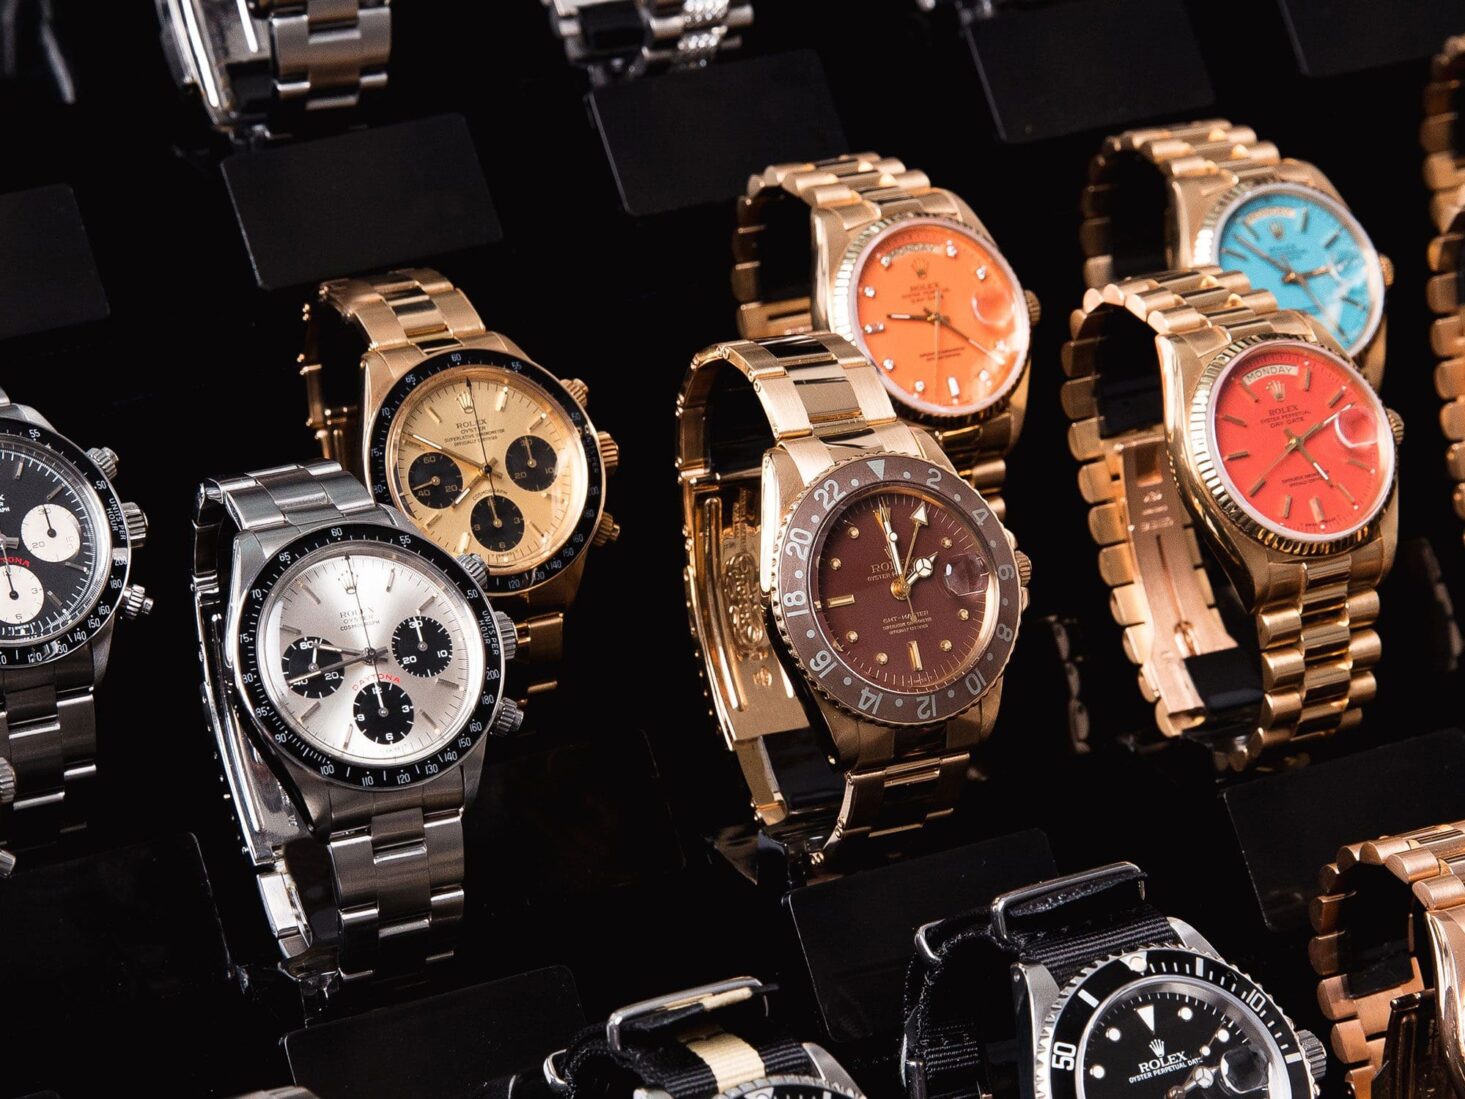 of their time: John and David Silver on the art of dealing vintage Rolexes – Luxury London